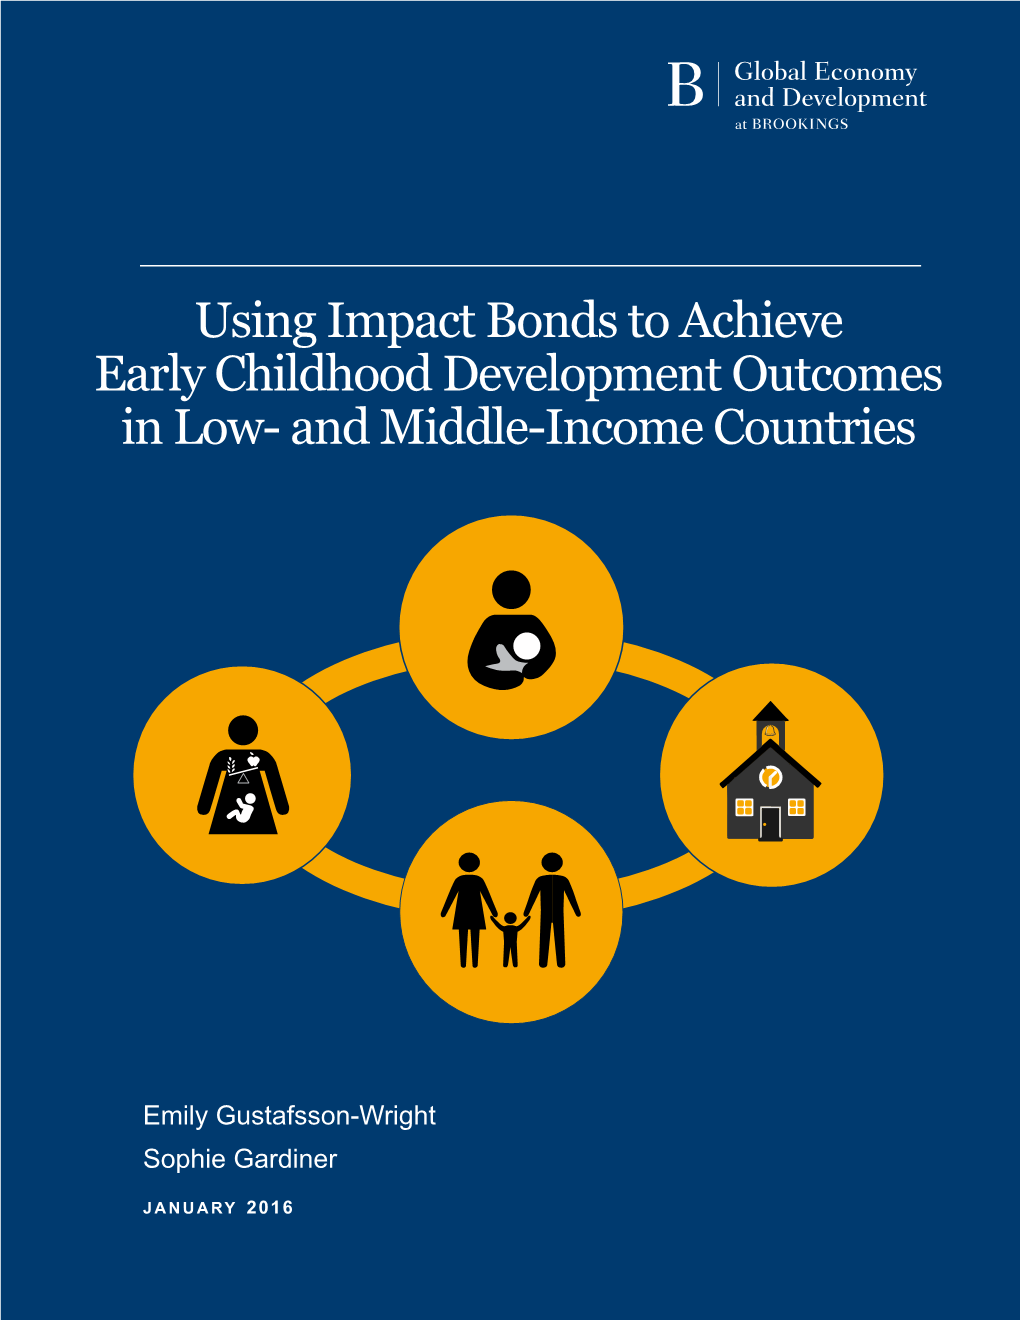 Using Impact Bonds to Achieve Early Childhood Development Outcomes in Low- and Middle-Income Countries